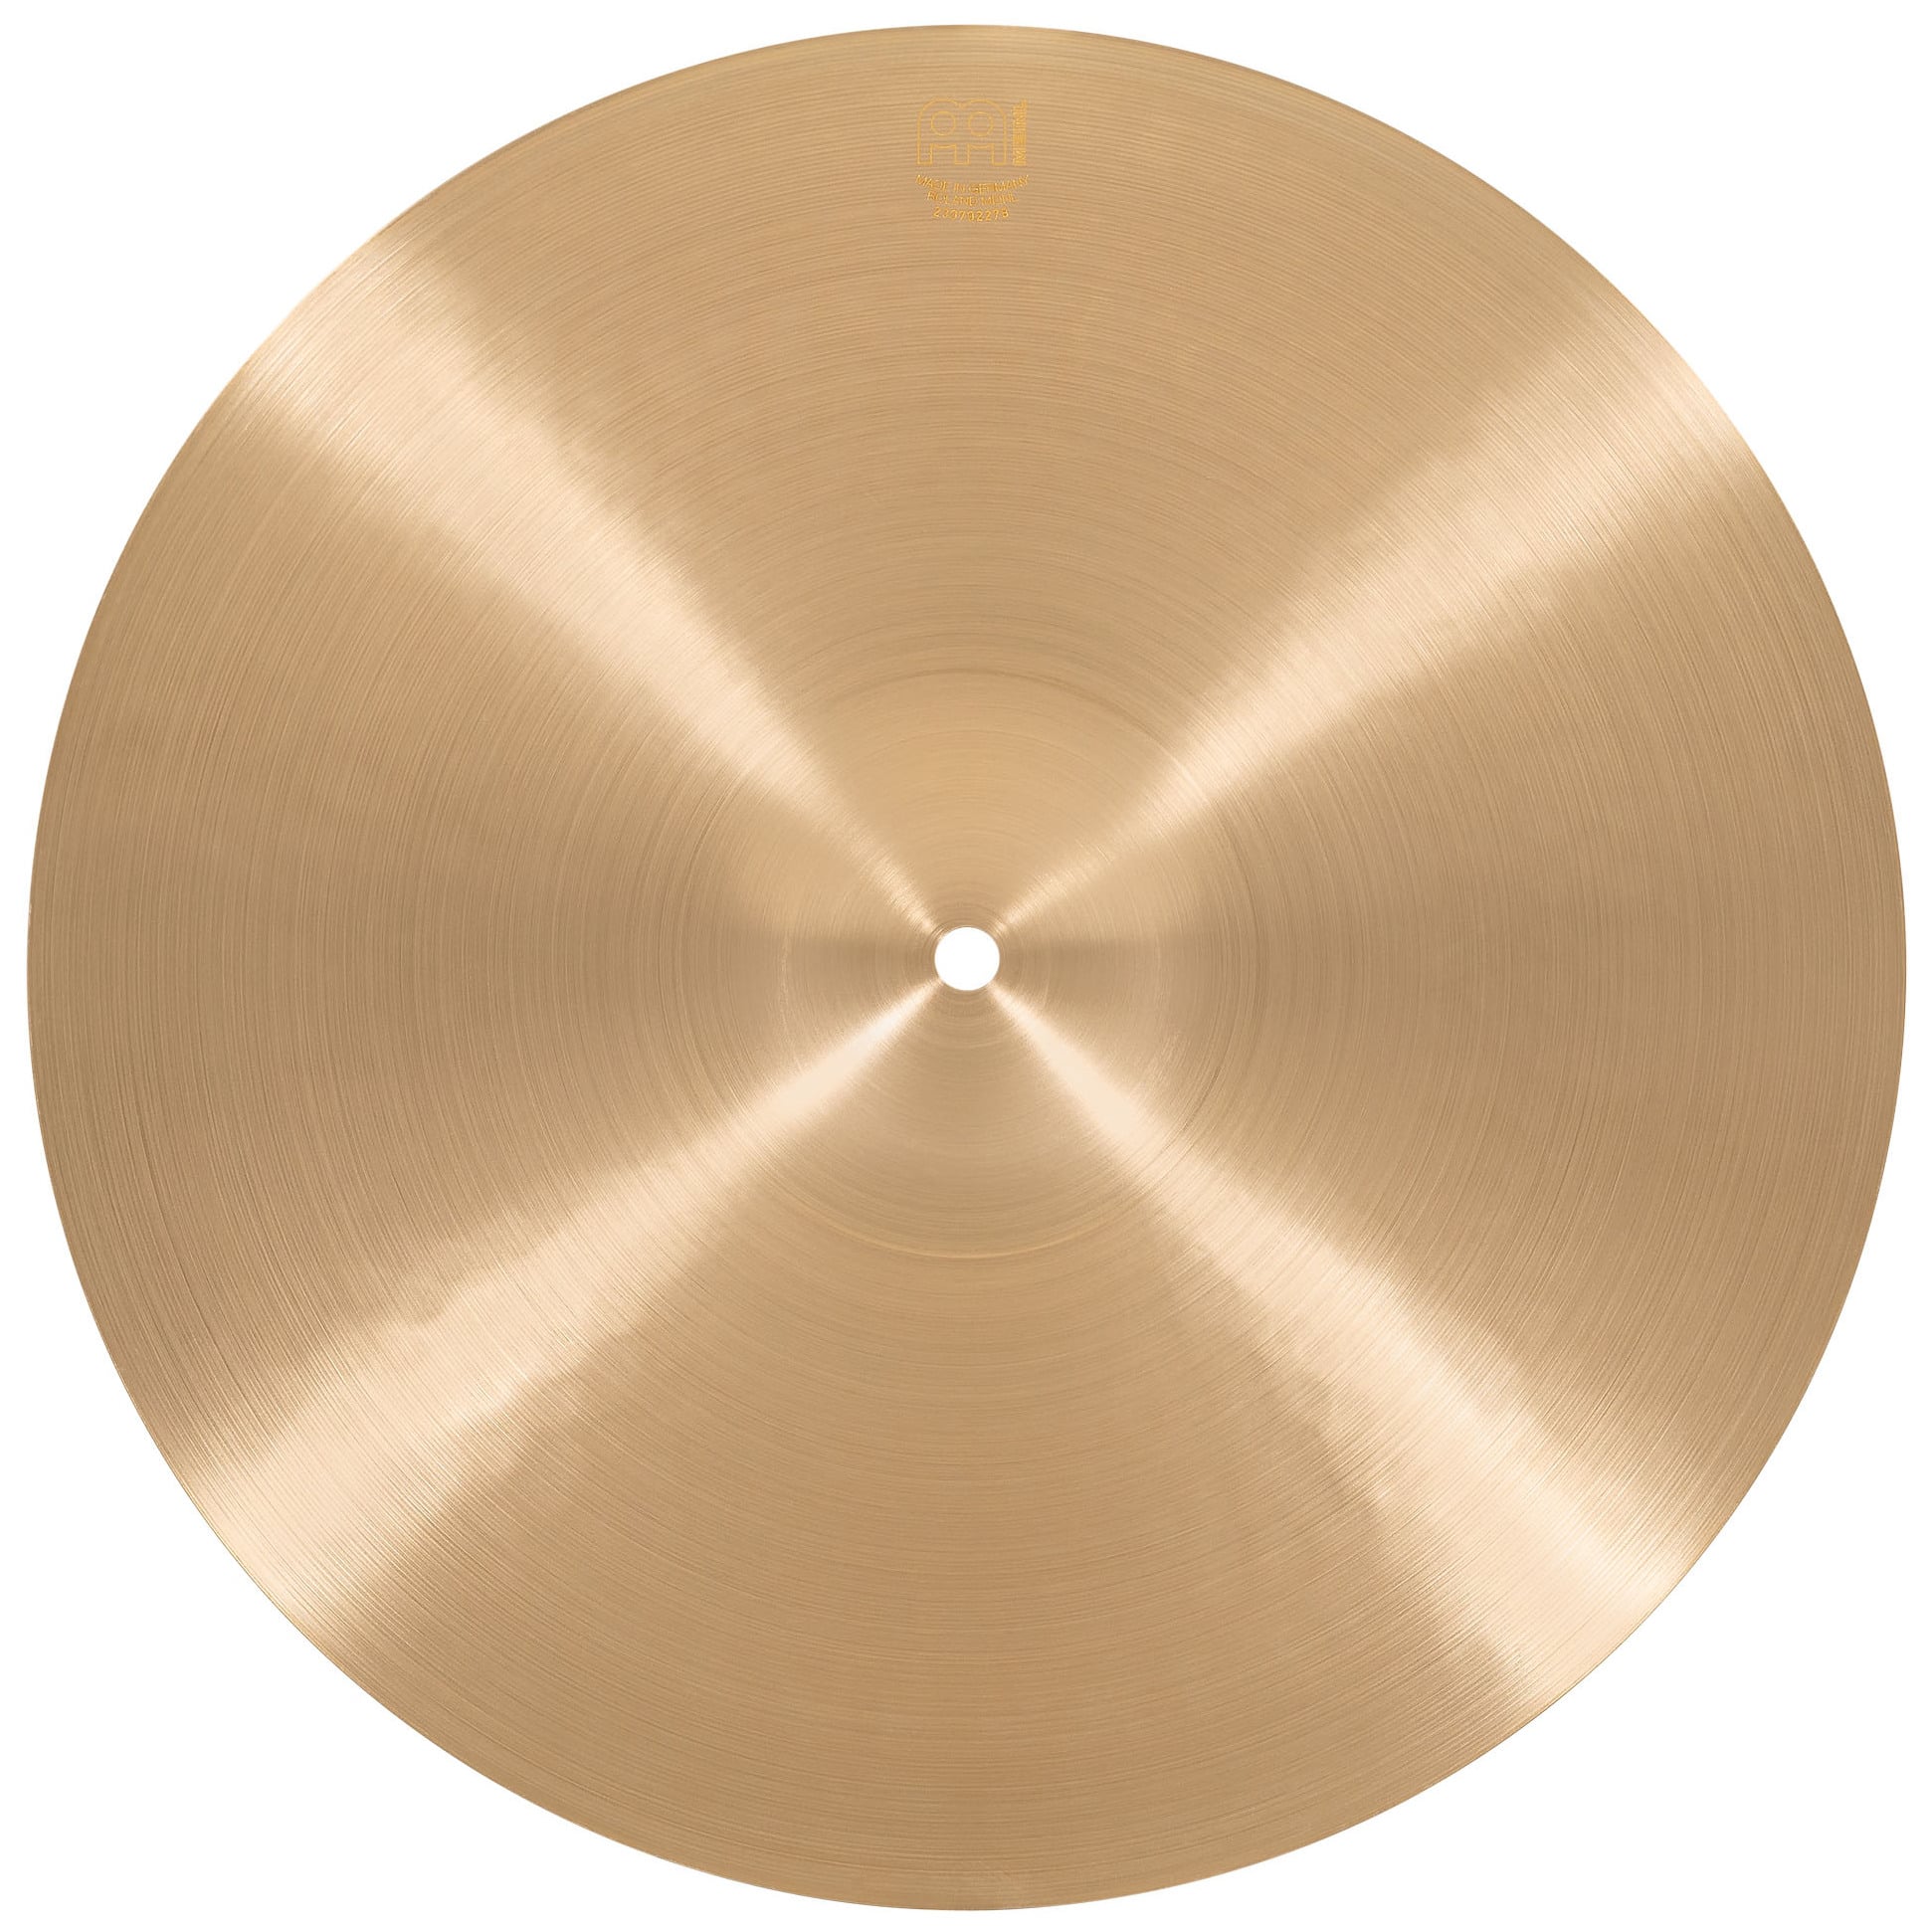 Meinl Cymbals PA15SWH - 15" Pure Alloy Soundwave Hihat 8